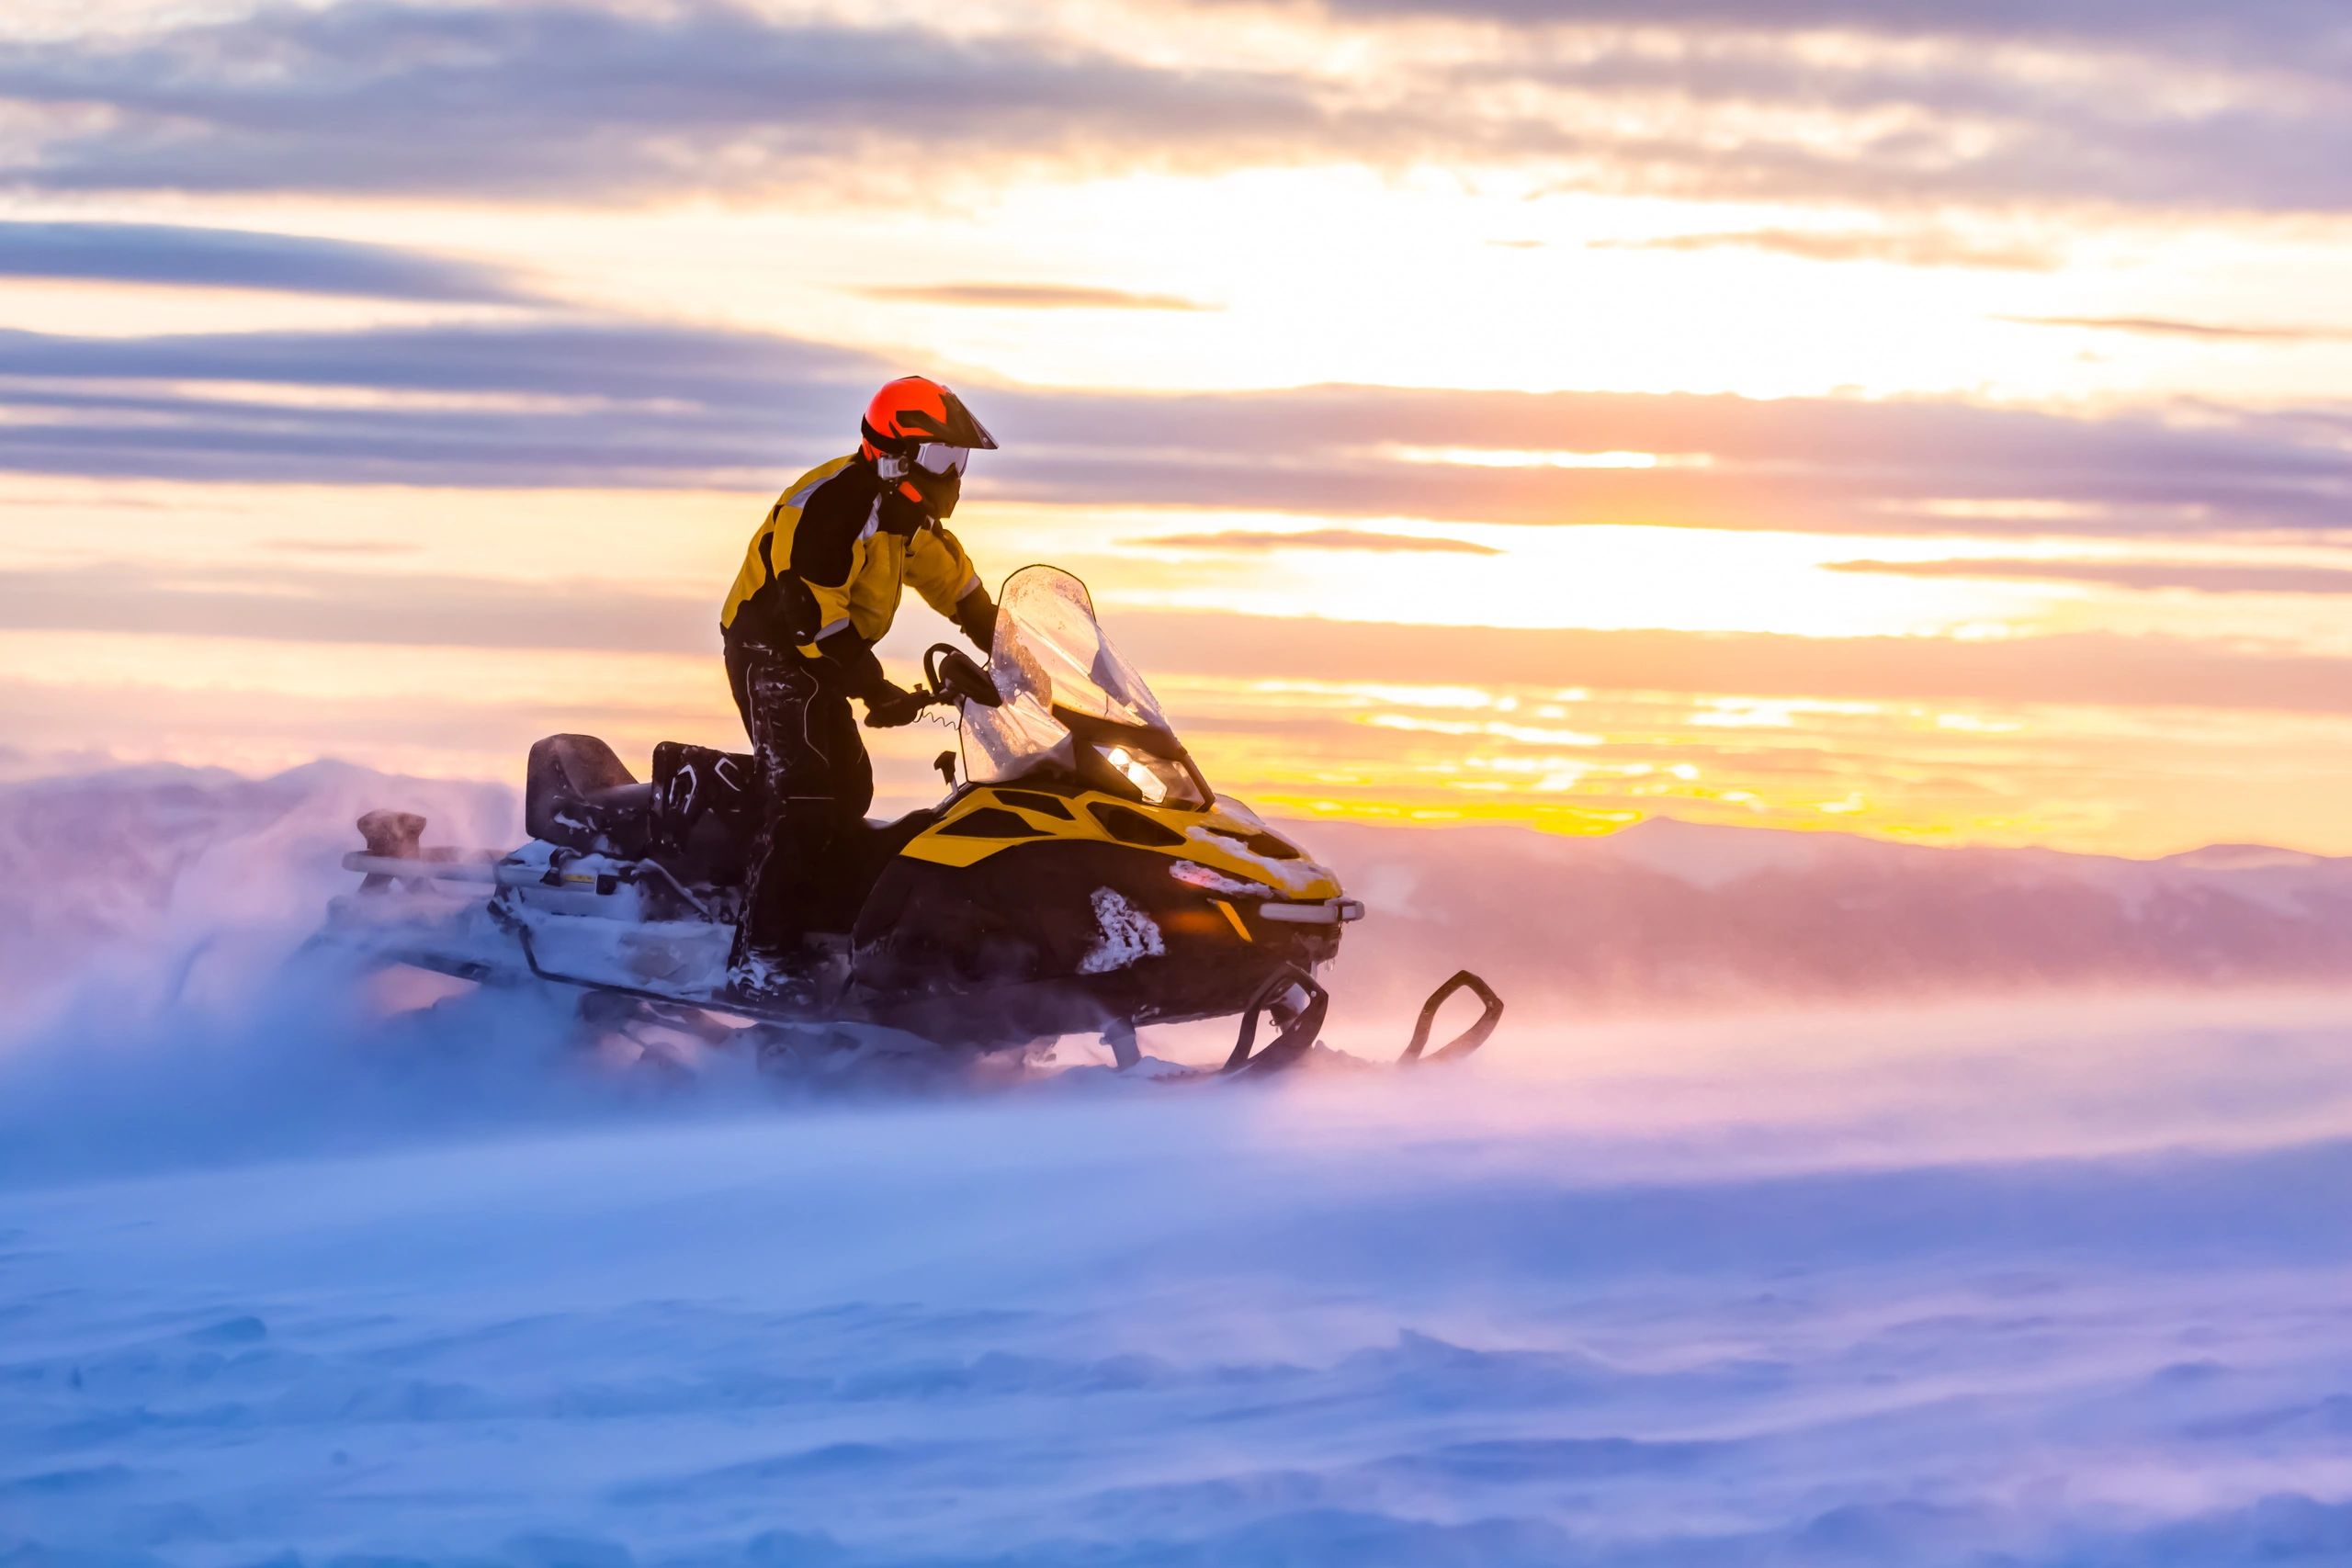 A man riding a snowmobile across a snowy landscape at sunset